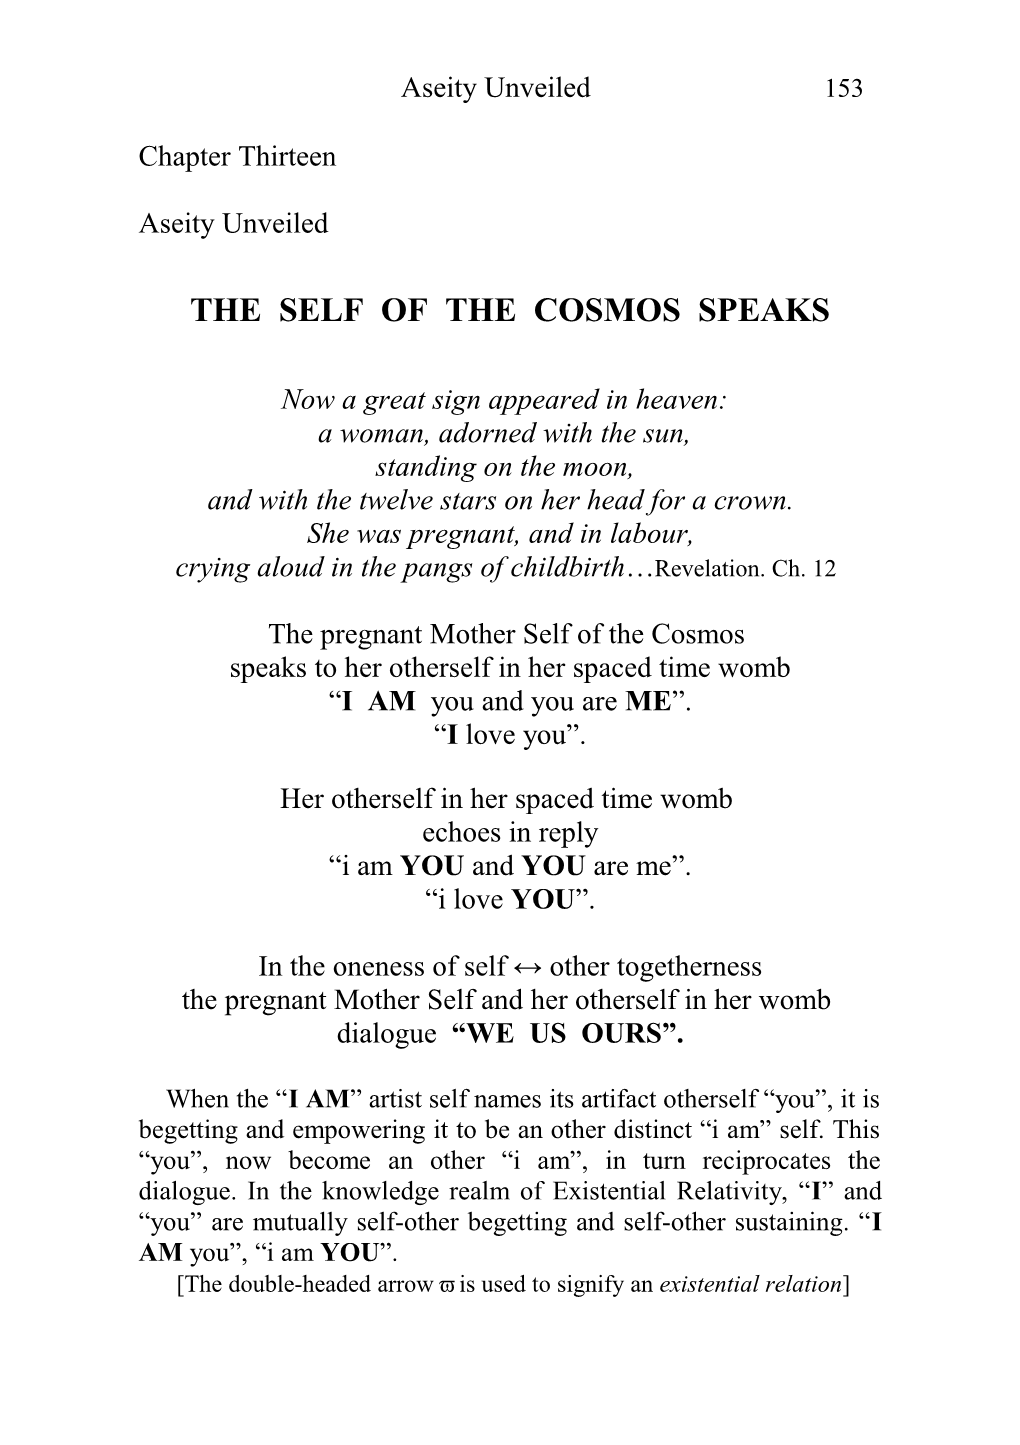 The Self of the Cosmos Speaks